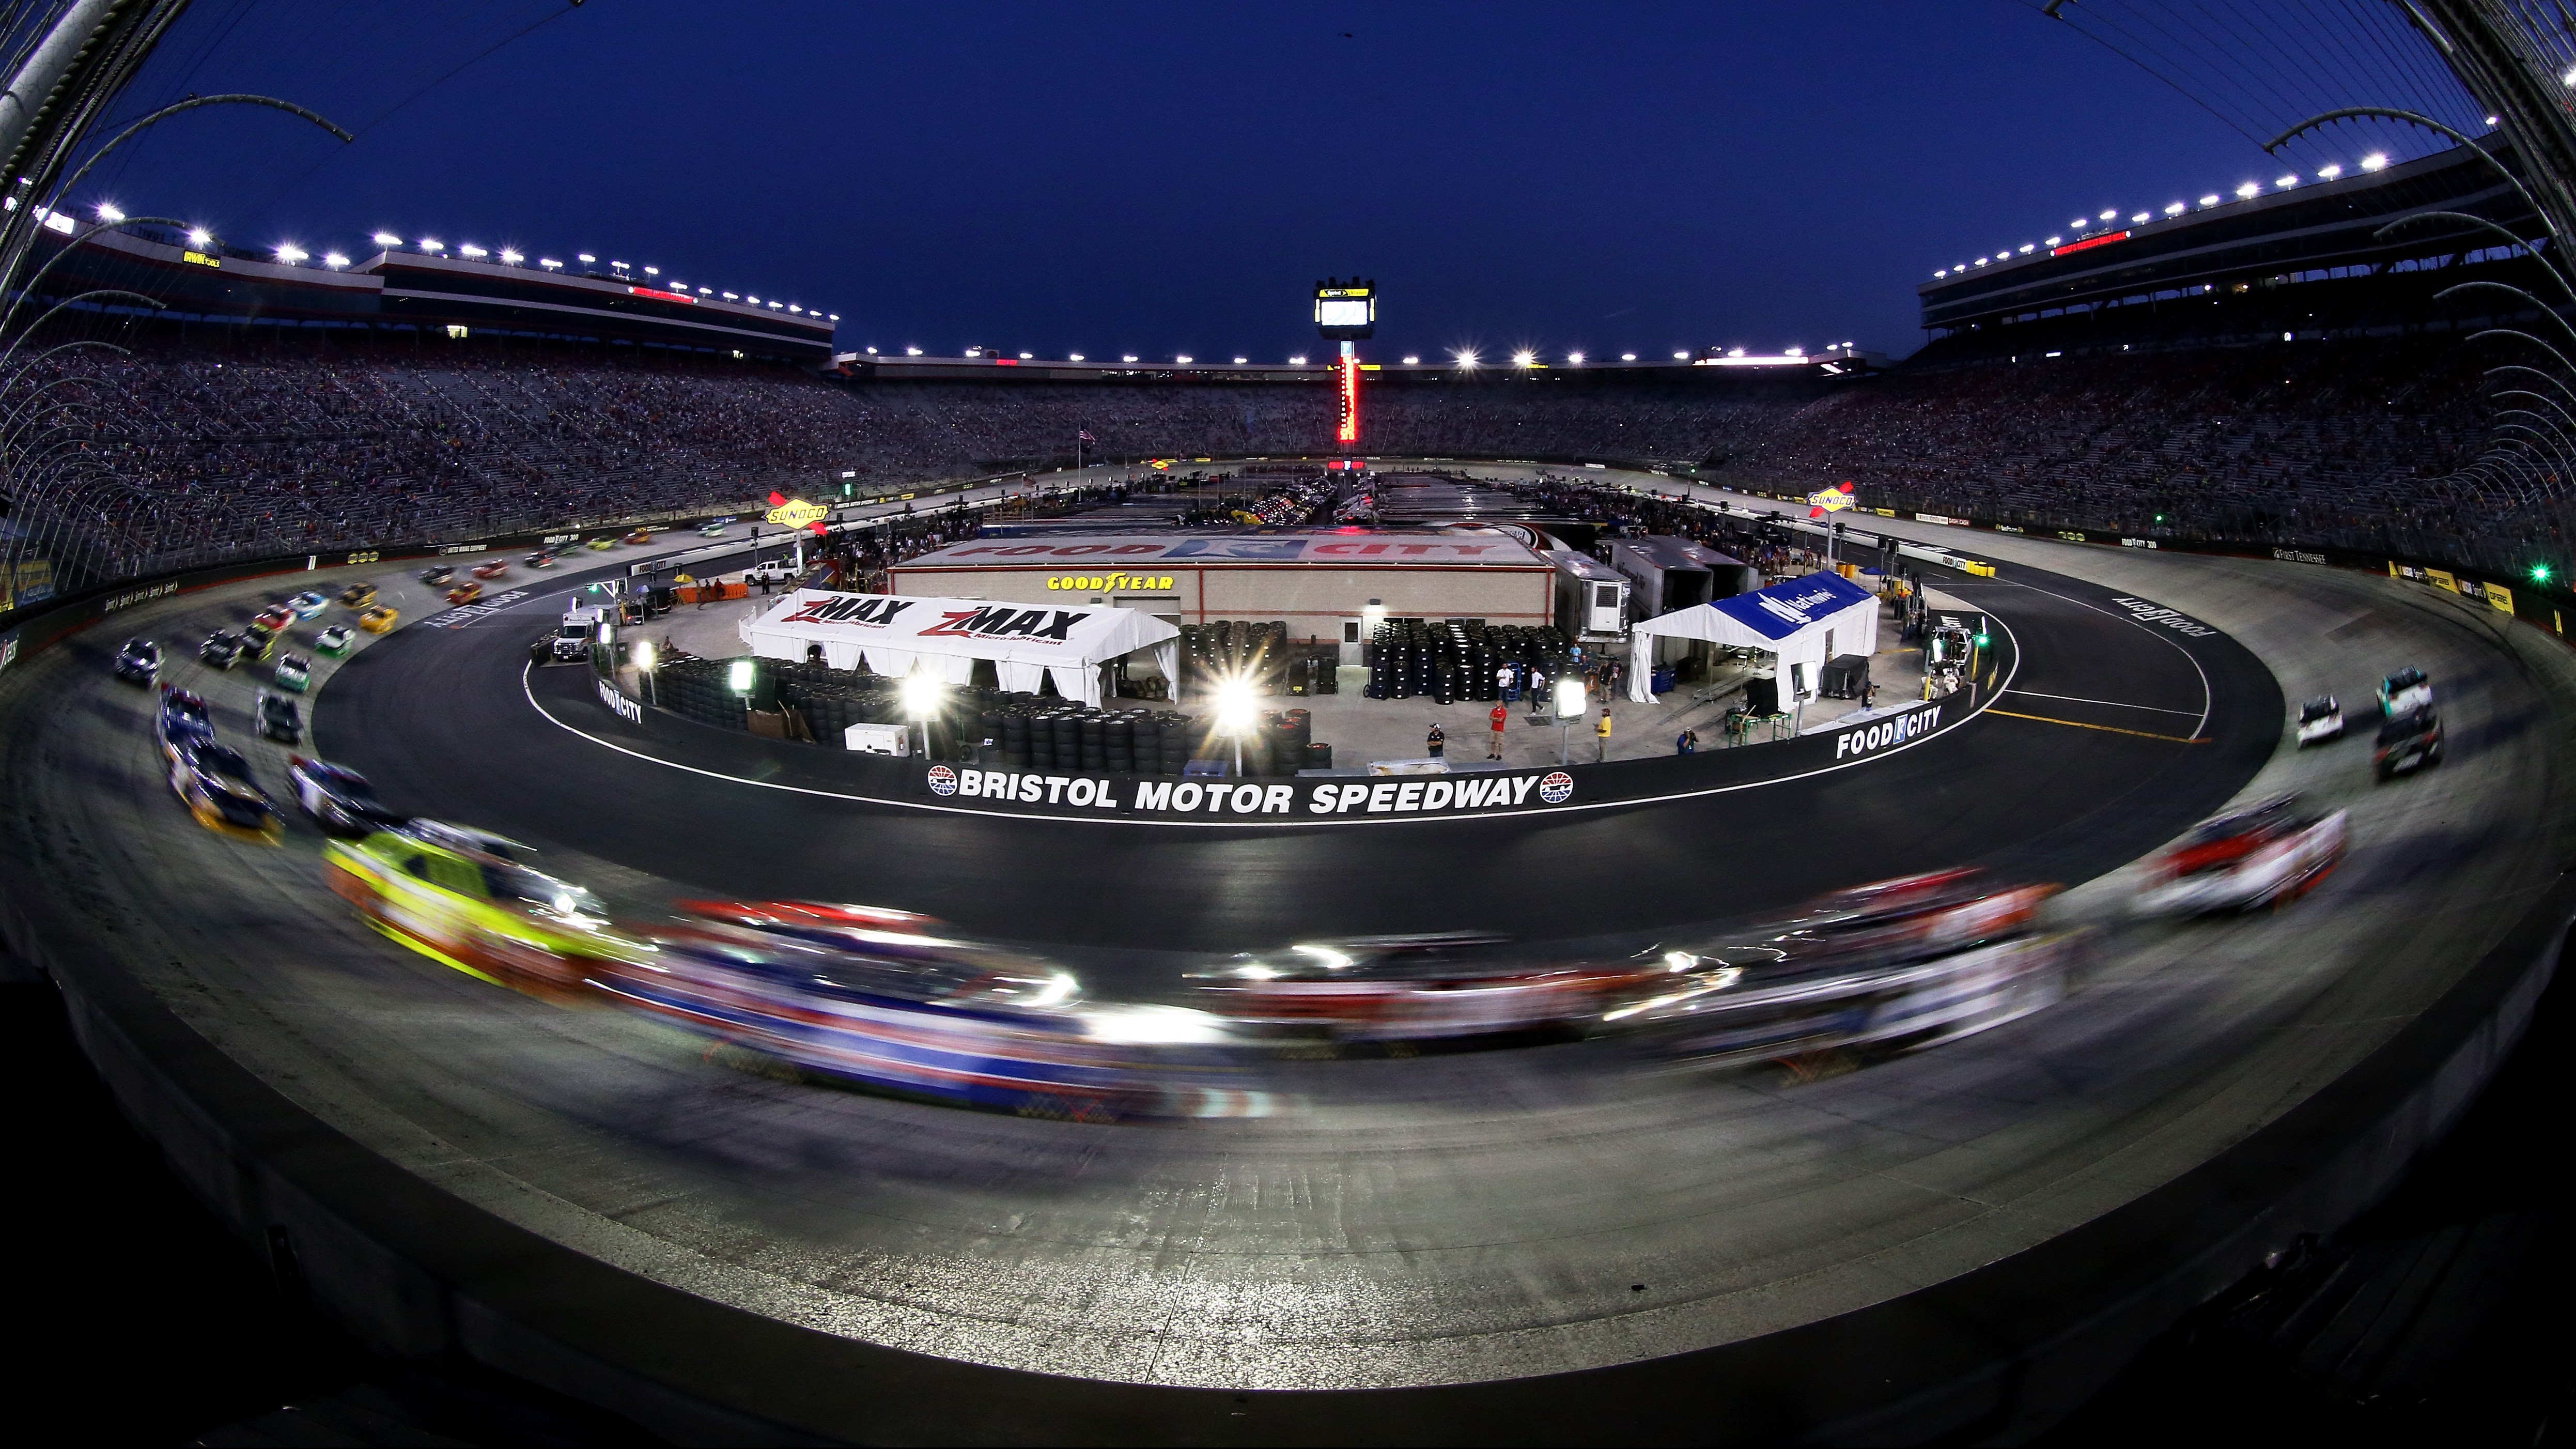 How to Watch NASCAR Irwin Tools Night Race Live Online